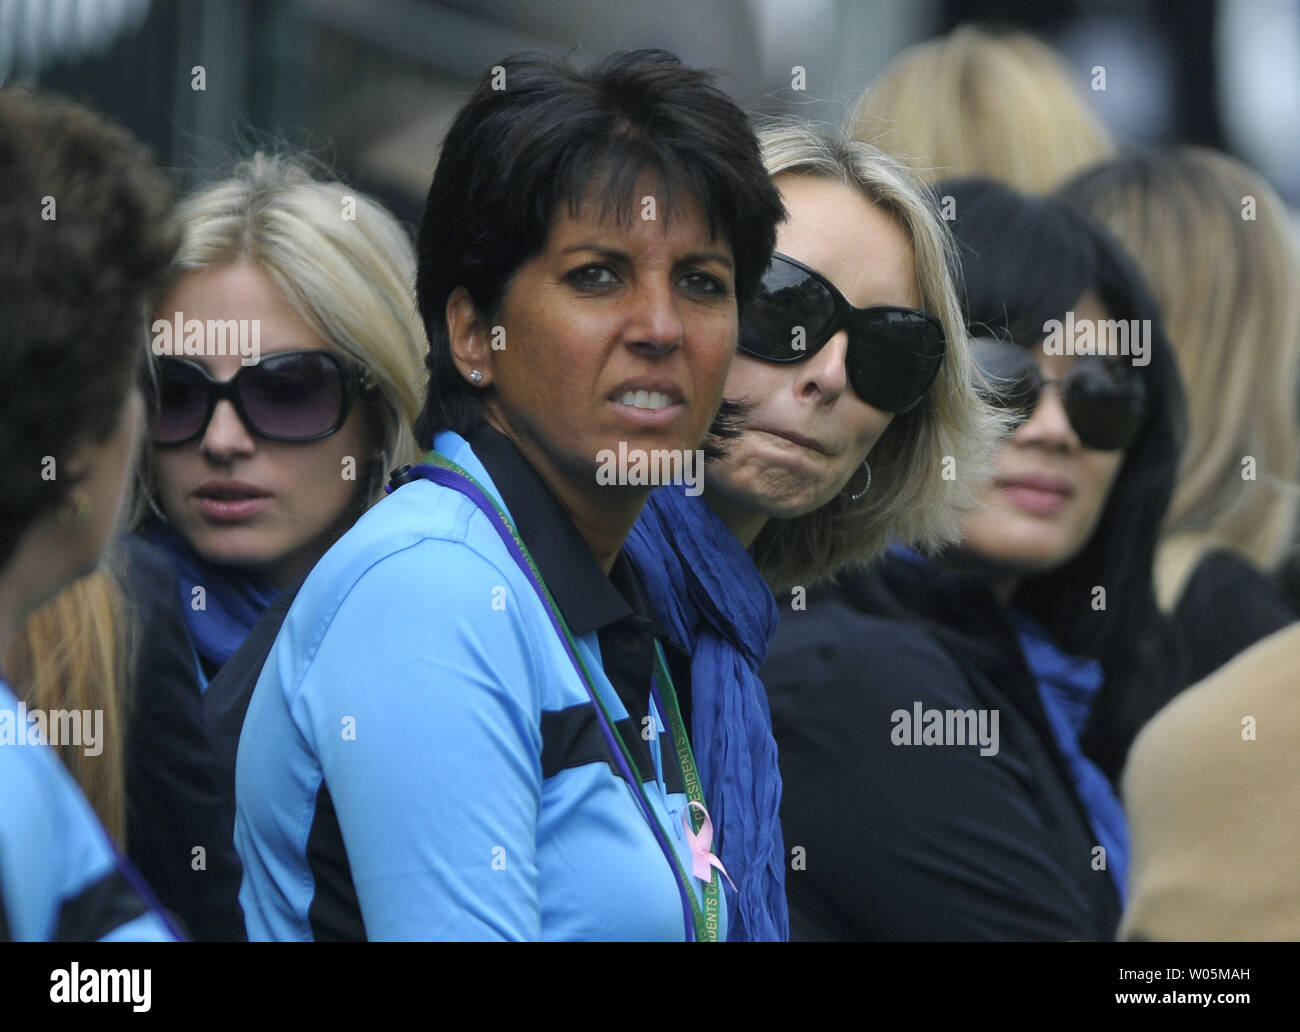 Wives of the International team watch their husbands tee off the 1st tee during the second round of The Presidents Cup at Harding Park Golf Course in San Francisco, California on October 9, 2009.    UPI/Kevin Dietsch Stock Photo